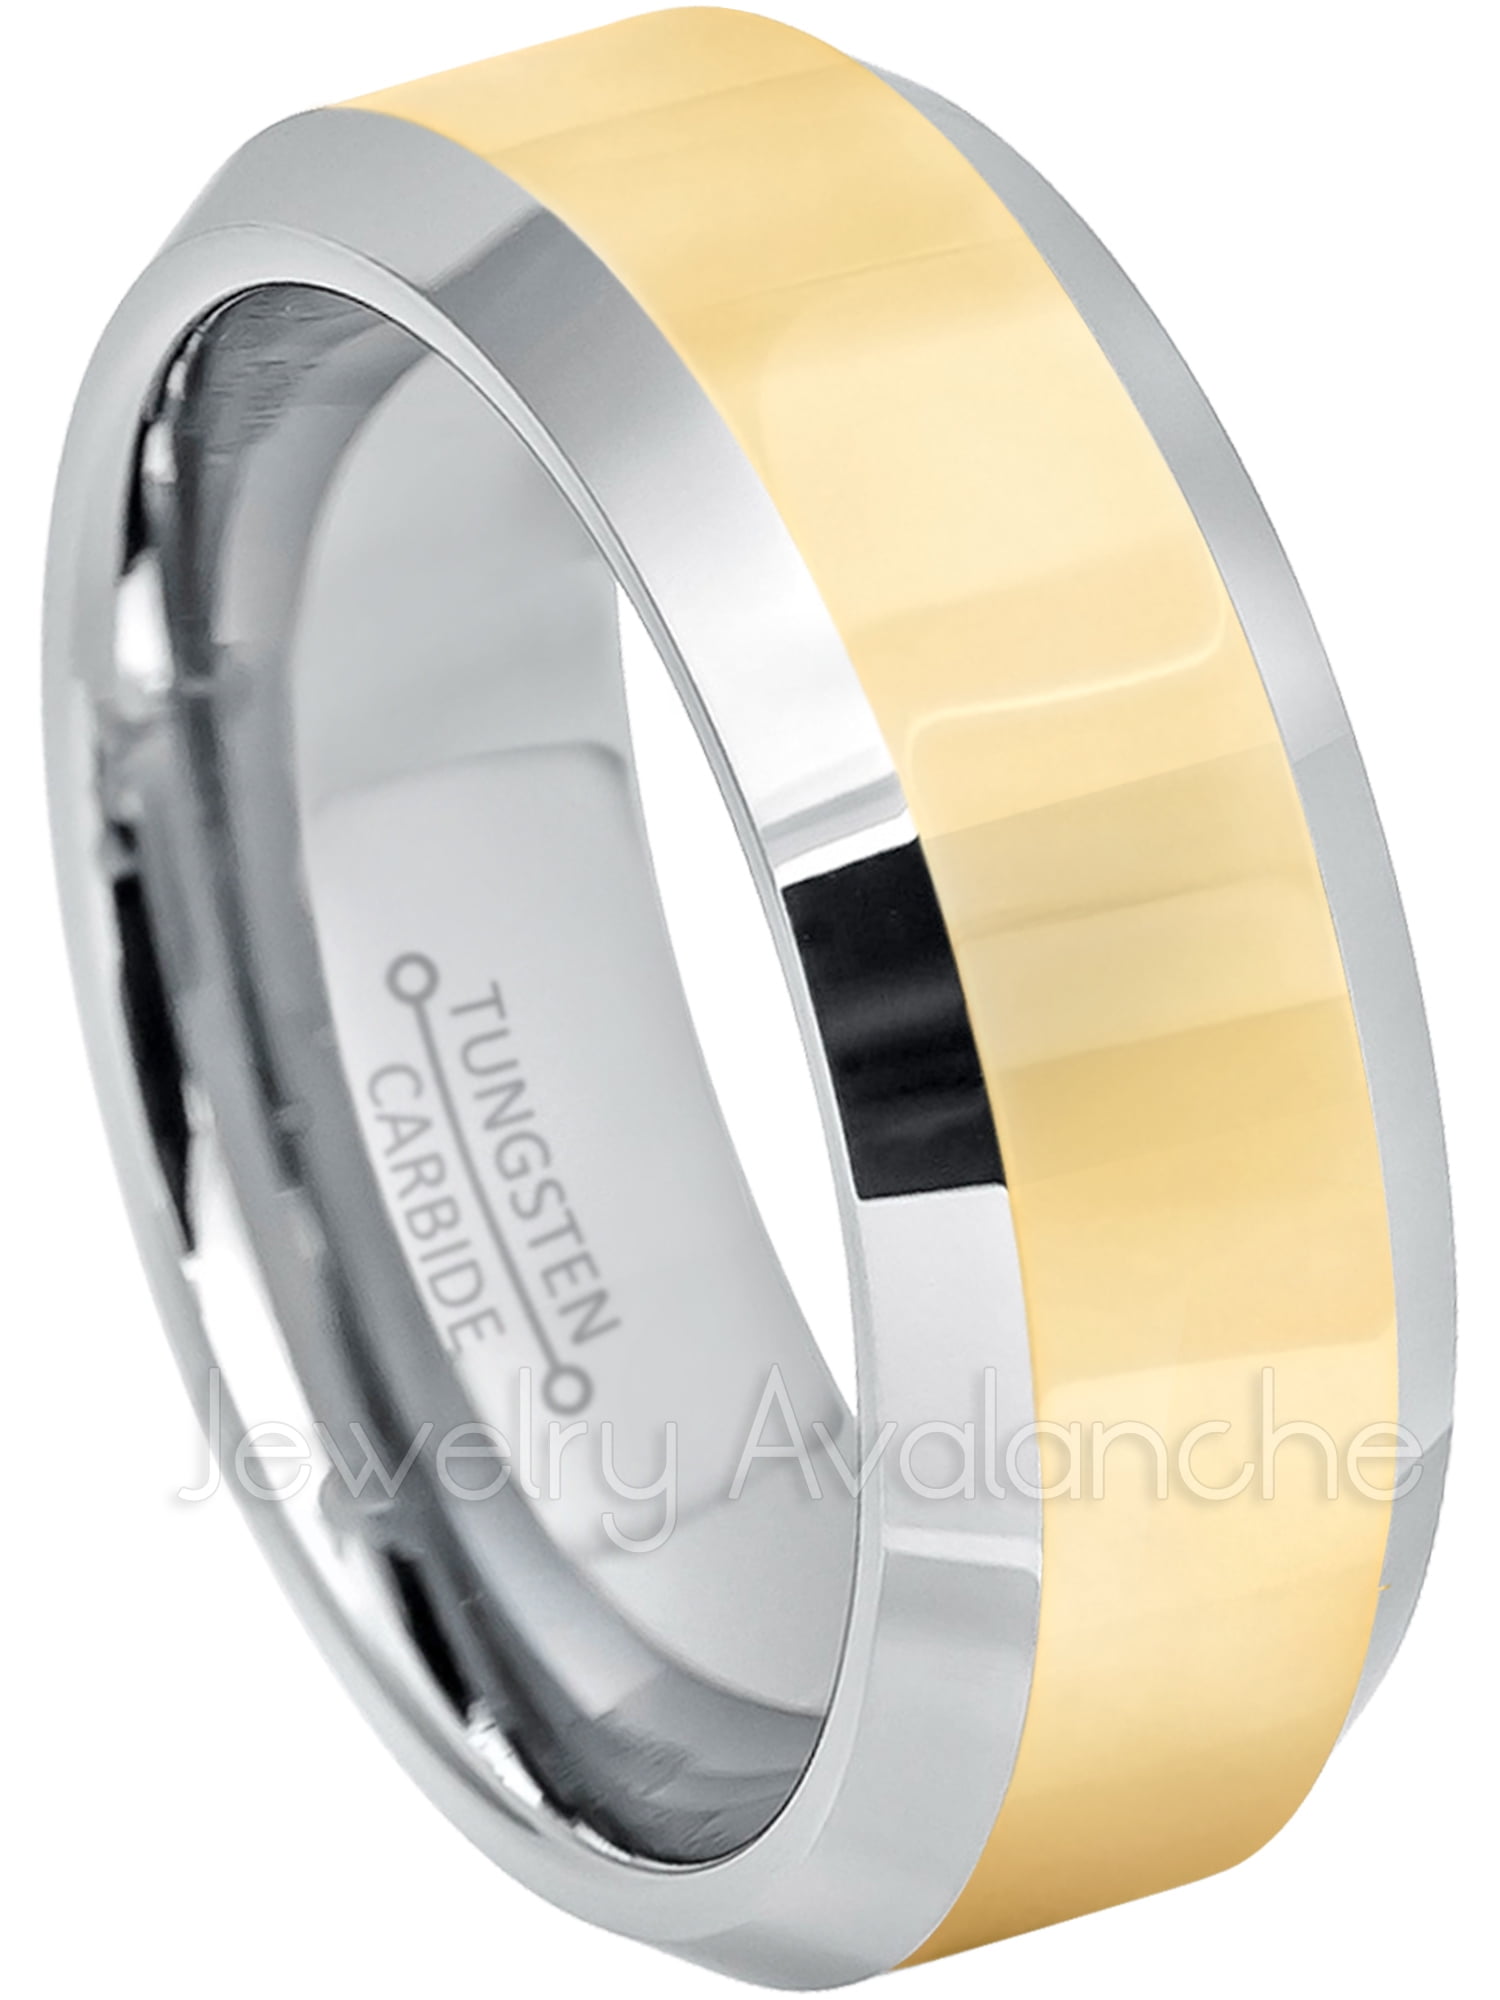 8mm /6mm Gold Tone Center Silver Tungsten Carbide Ring Couples Dome Wedding Band 